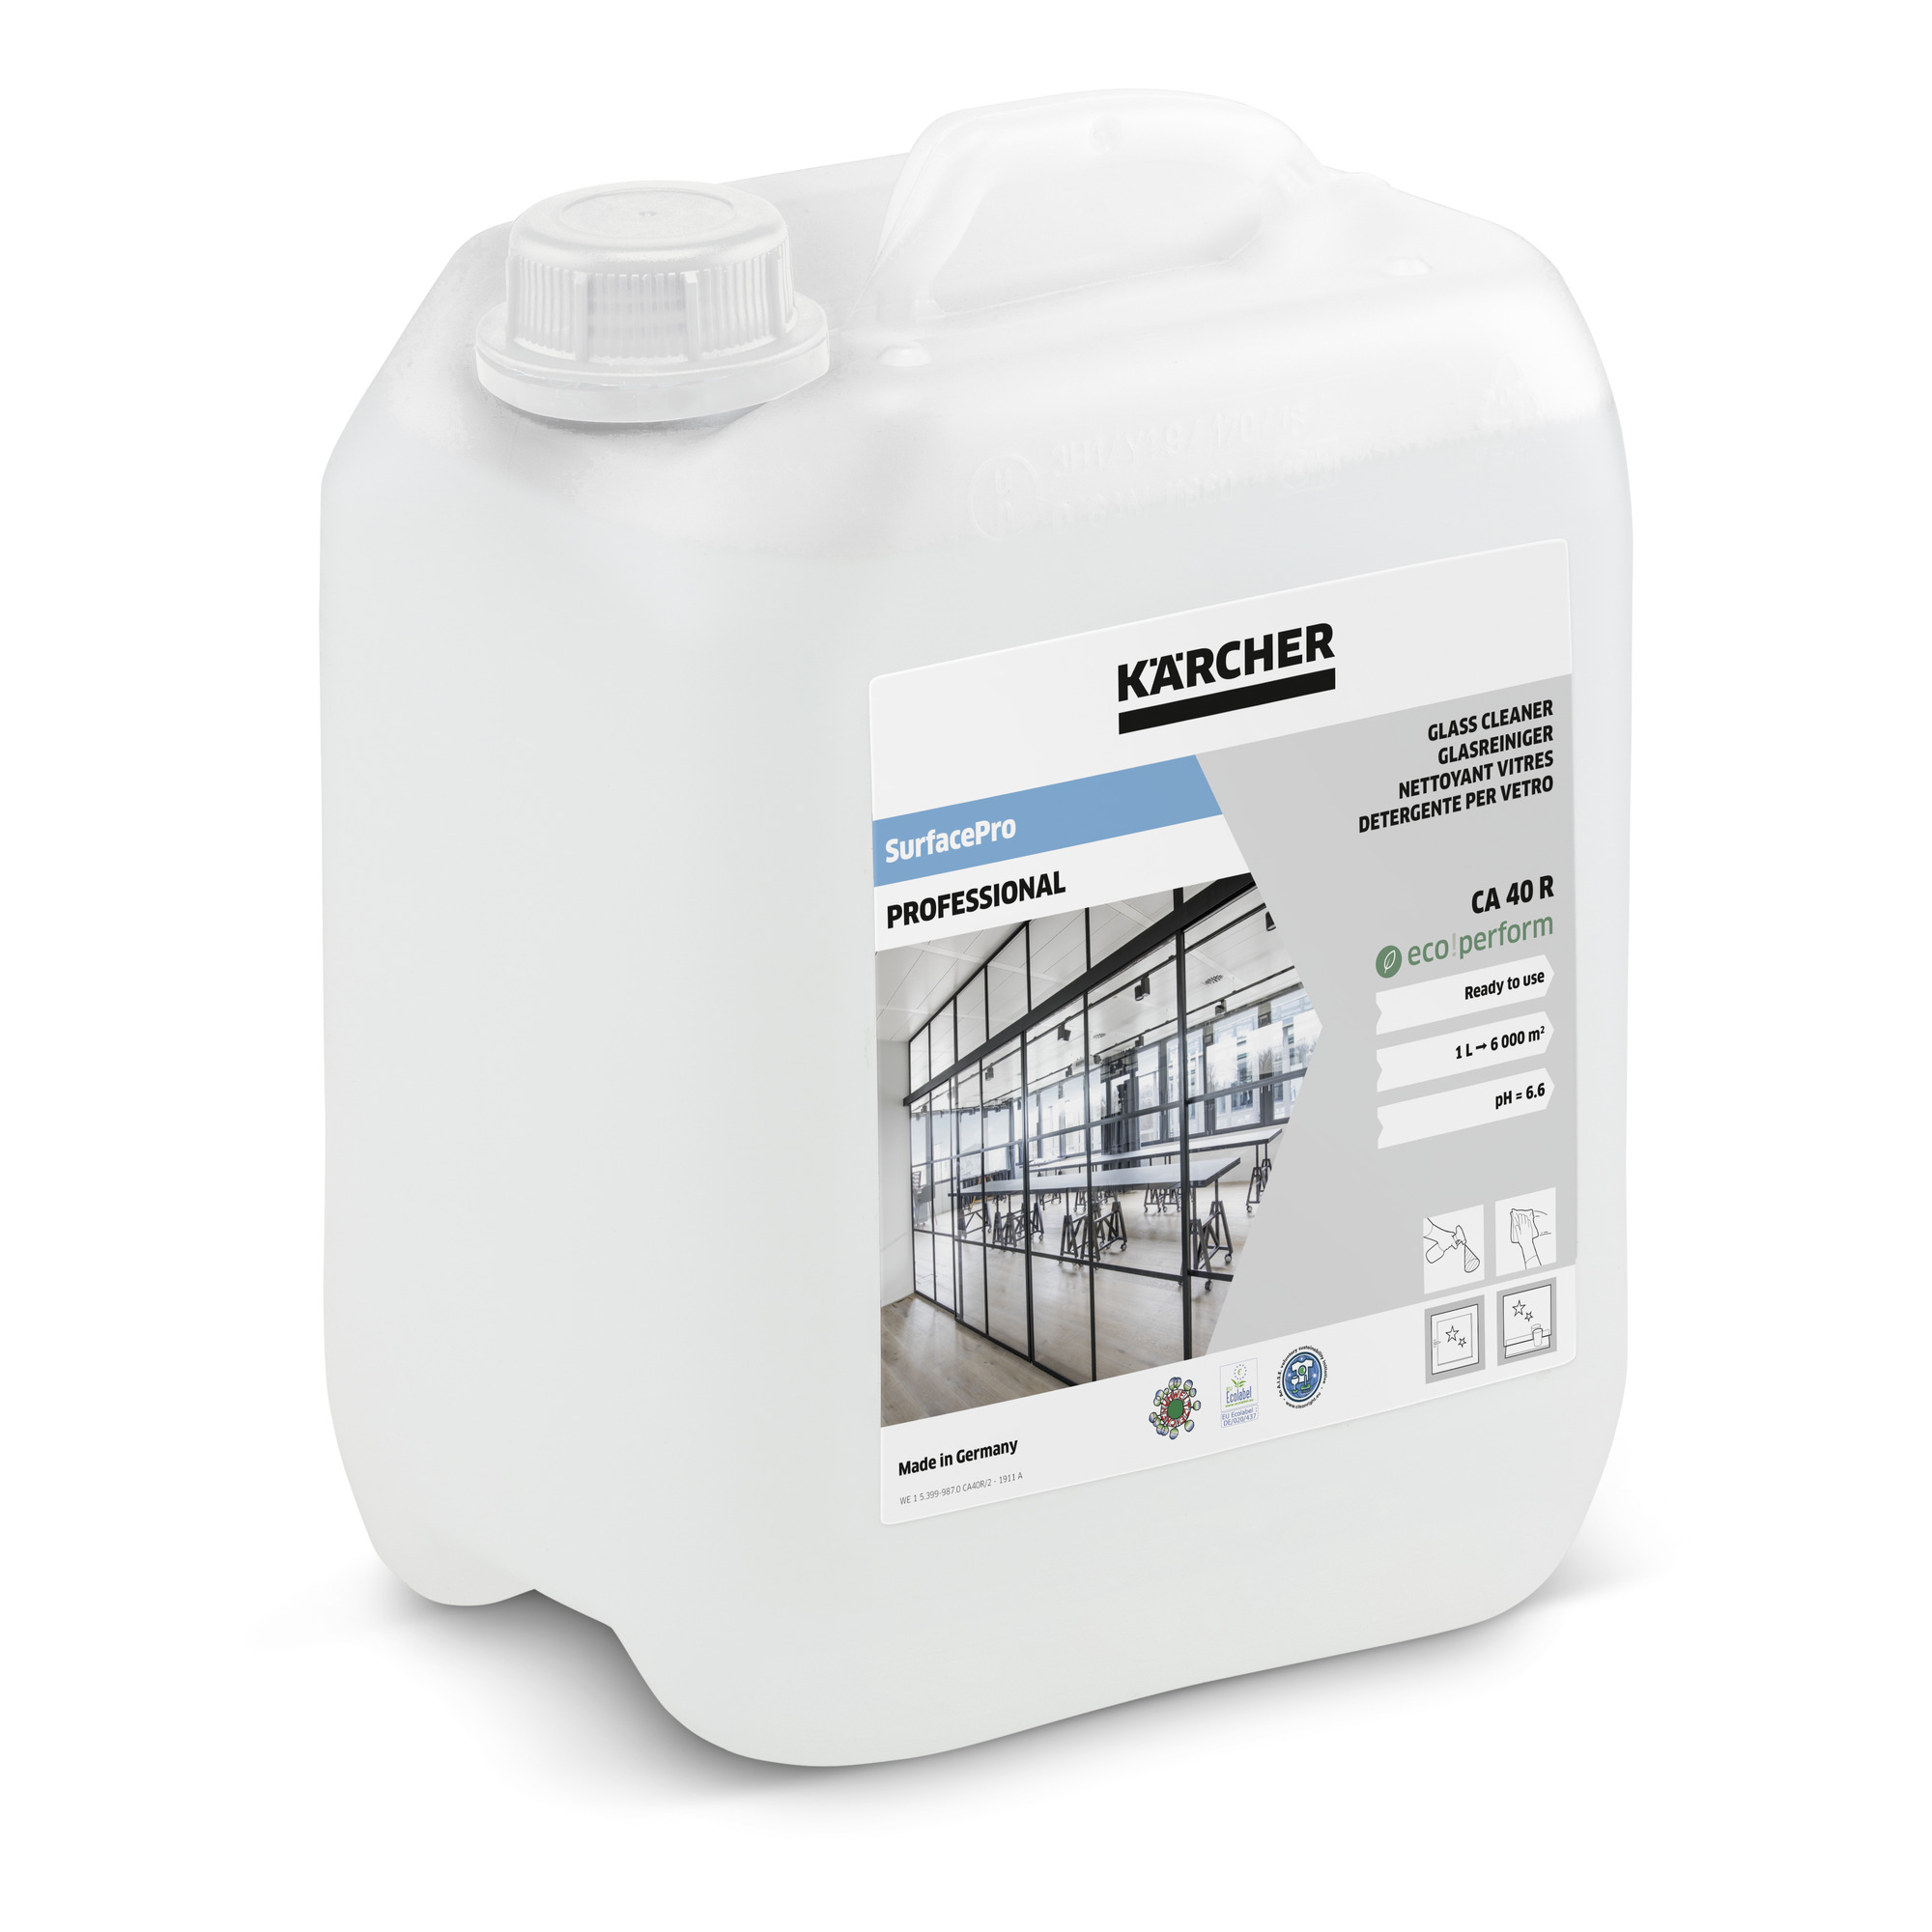 Kaercher SurfacePro Glass Cleaner CA 40 R eco!perform